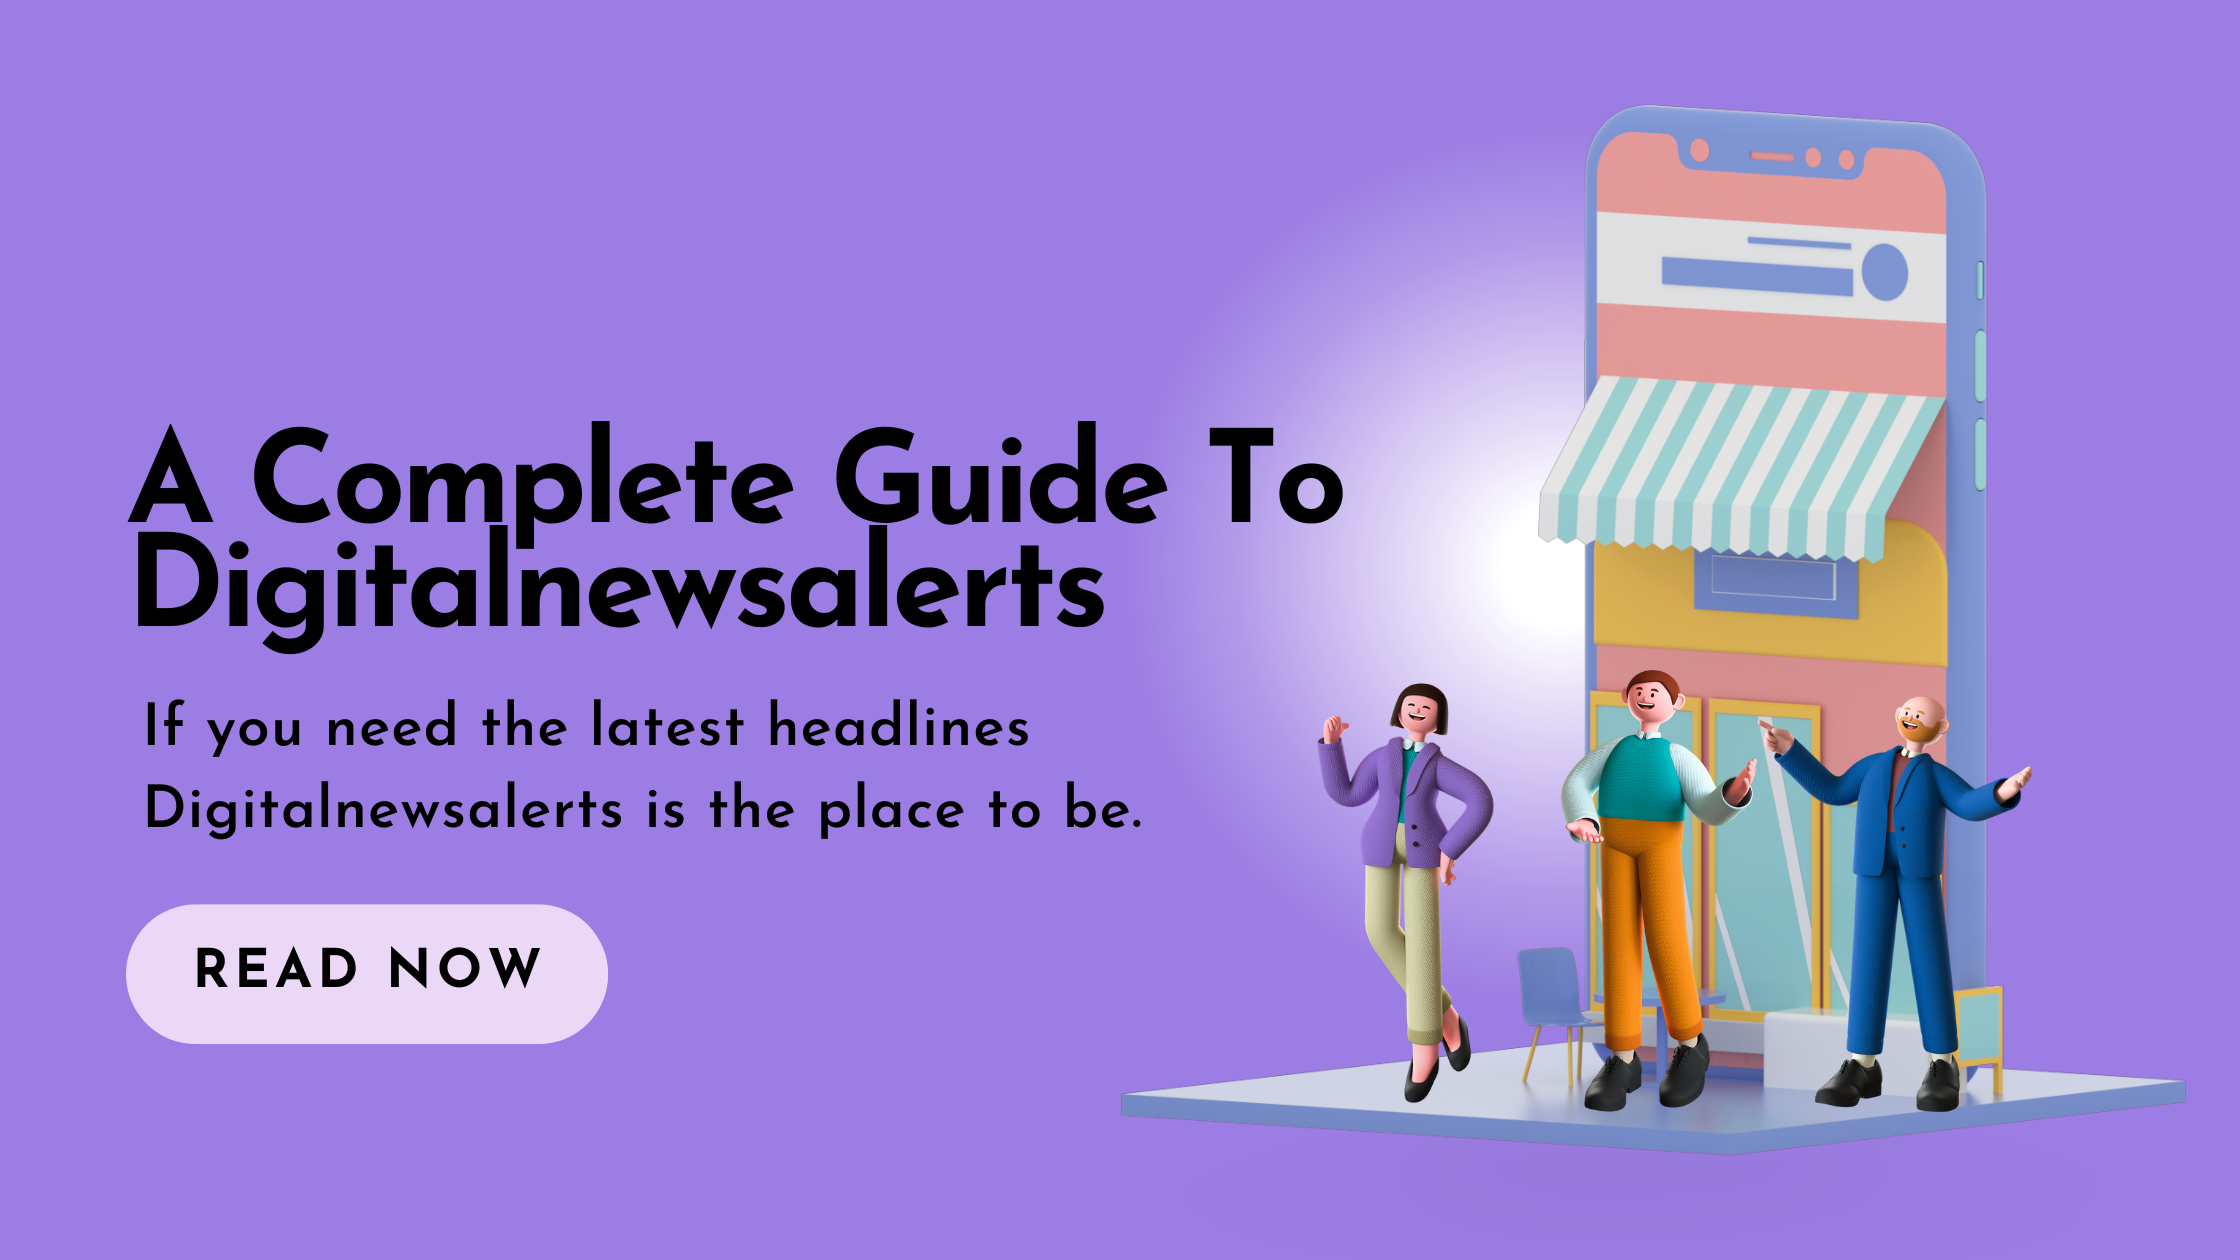 A Complete Guide To Digitalnewsalerts